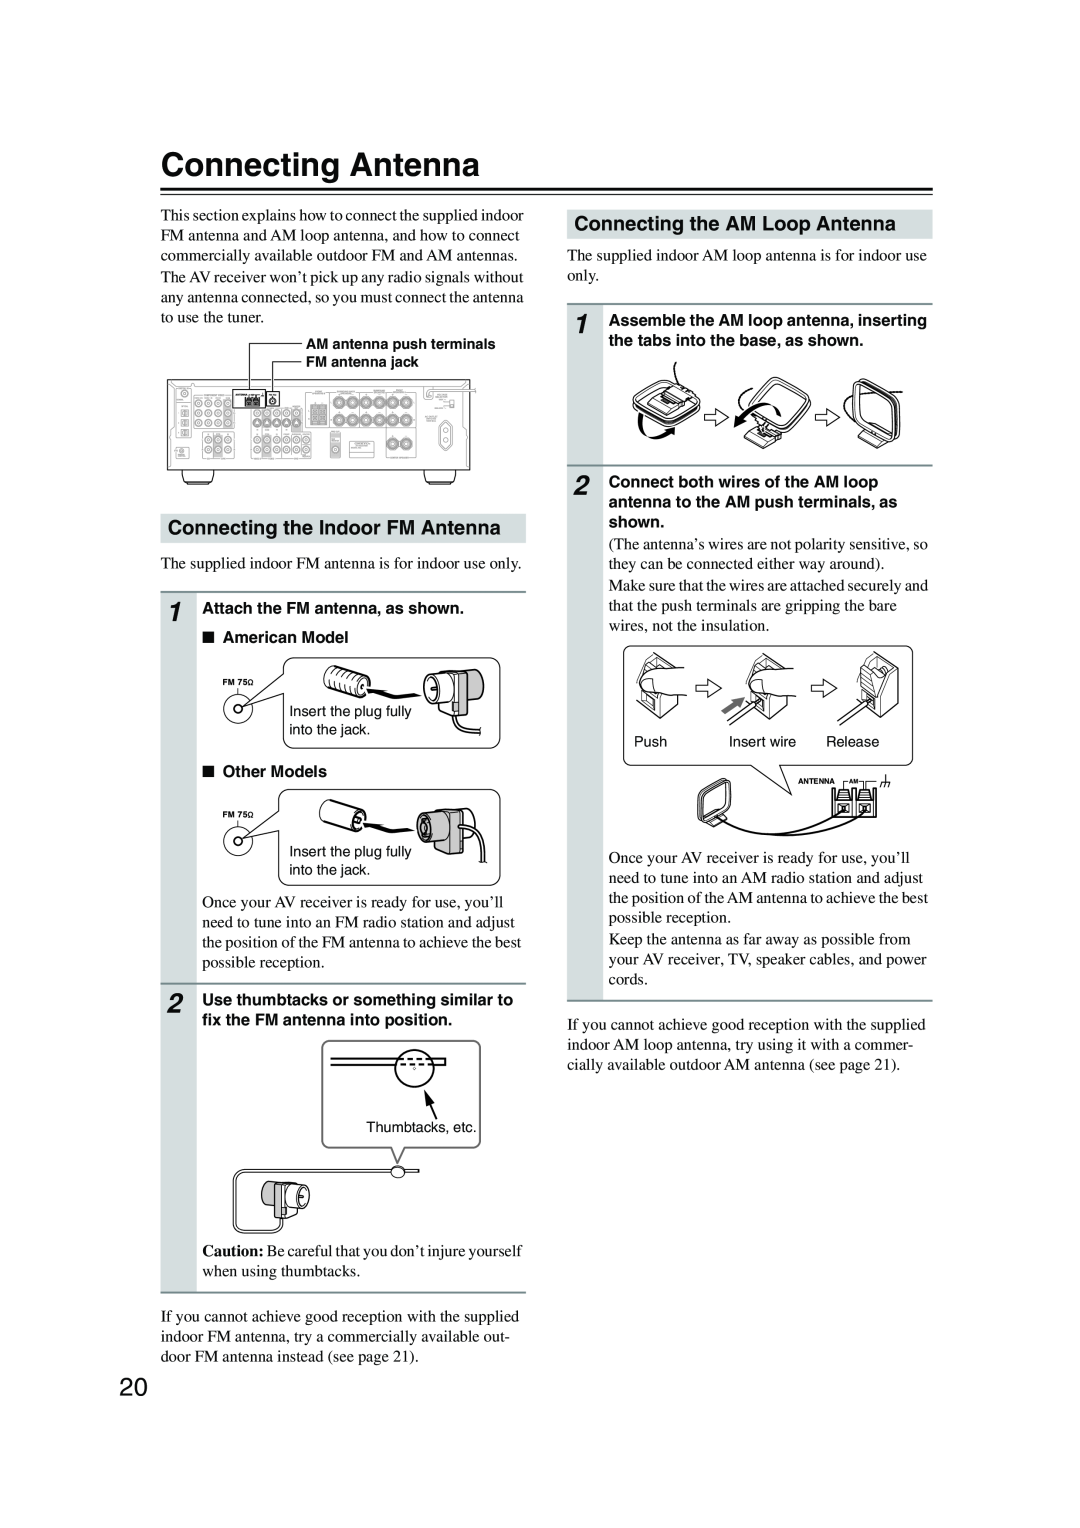 Onkyo HT-S780 instruction manual Connecting Antenna, Connecting the Indoor FM Antenna, Connecting the AM Loop Antenna 